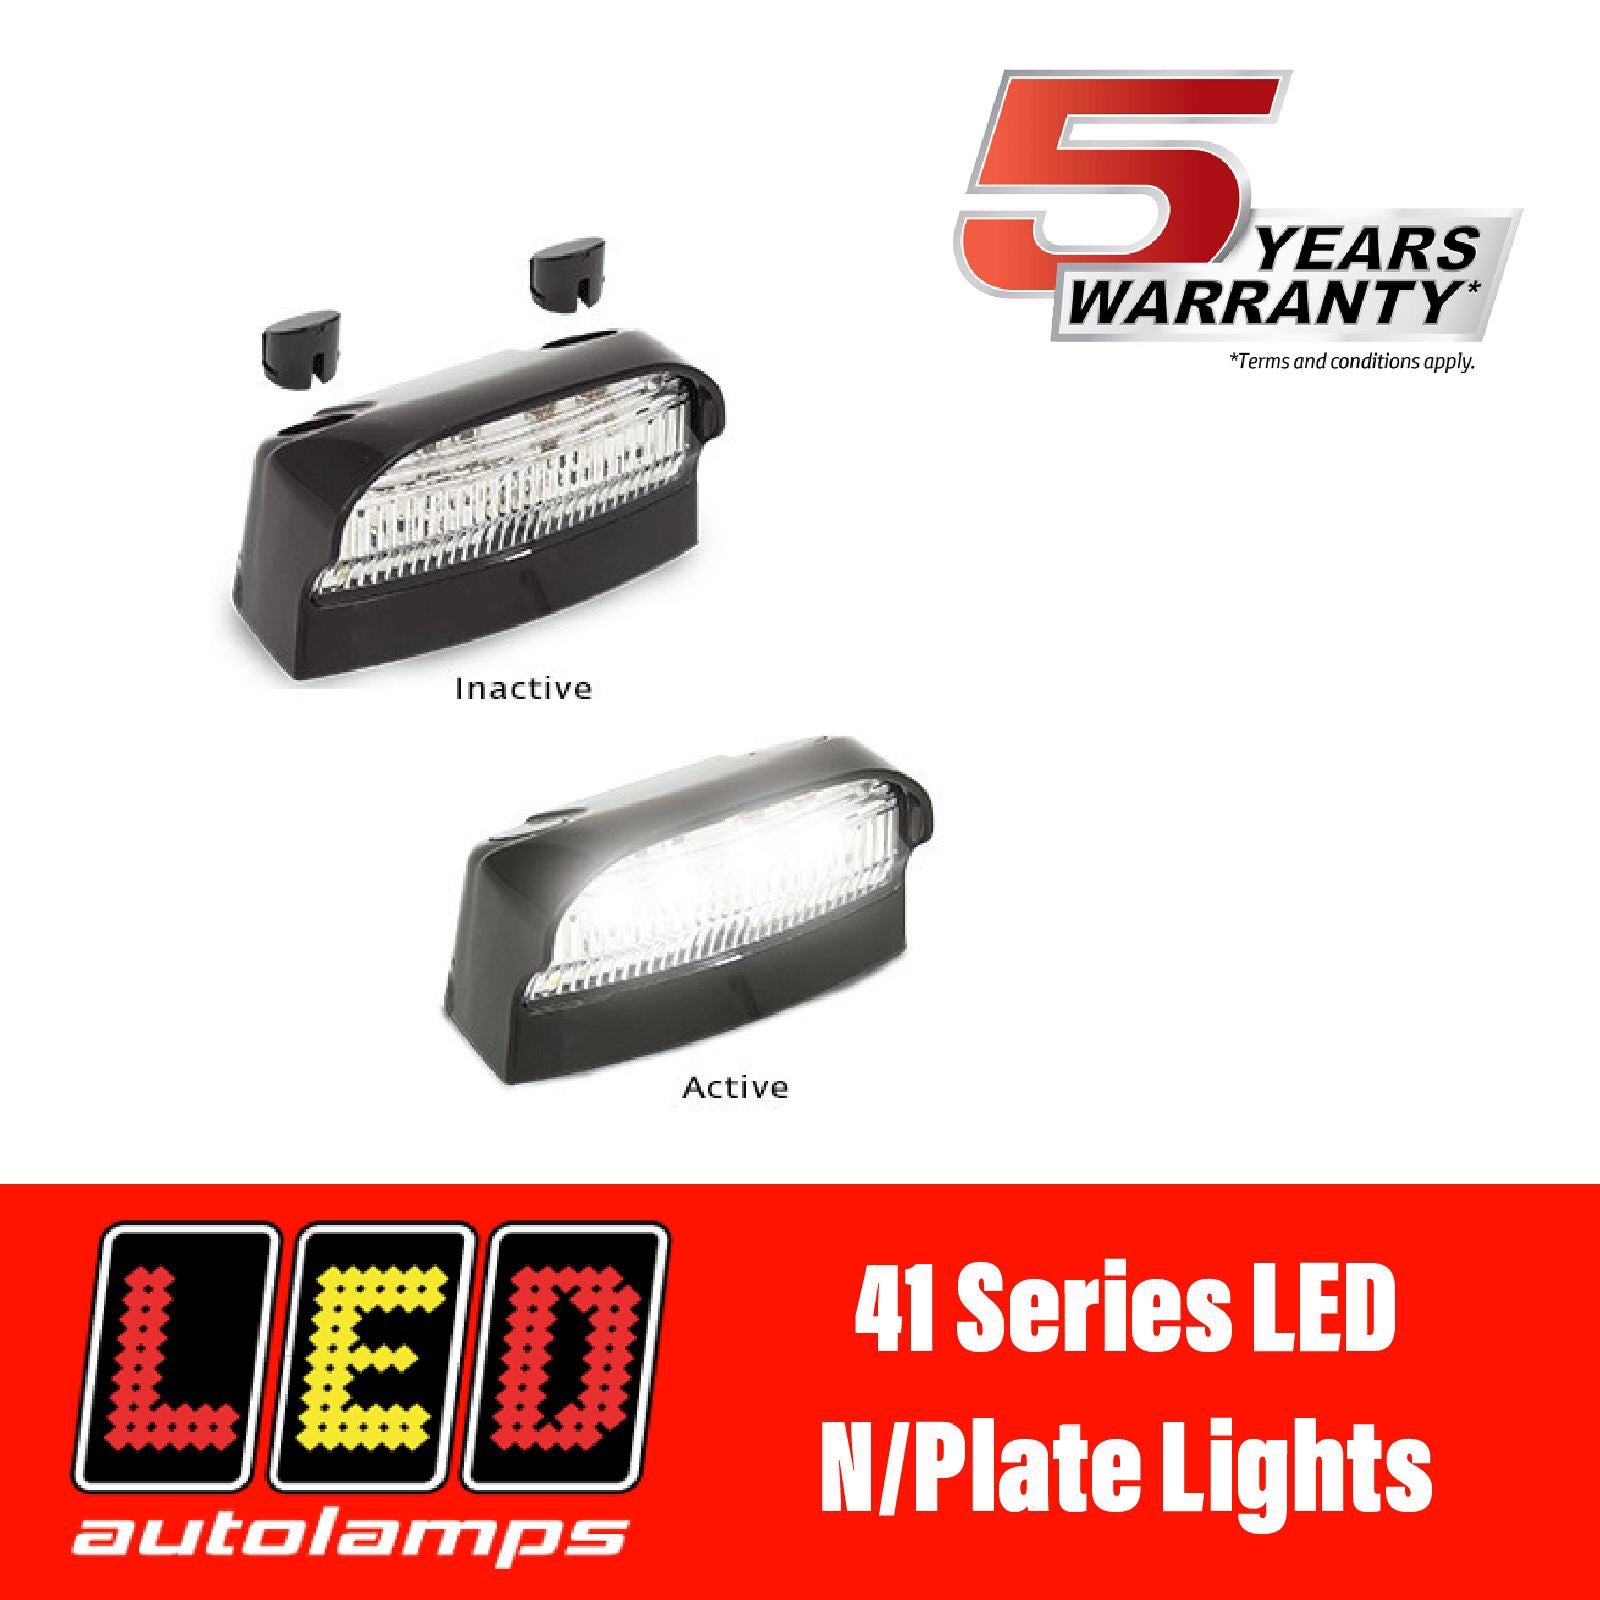 LED AUTOLAMPS 41 SERIES LED Number Plate Light